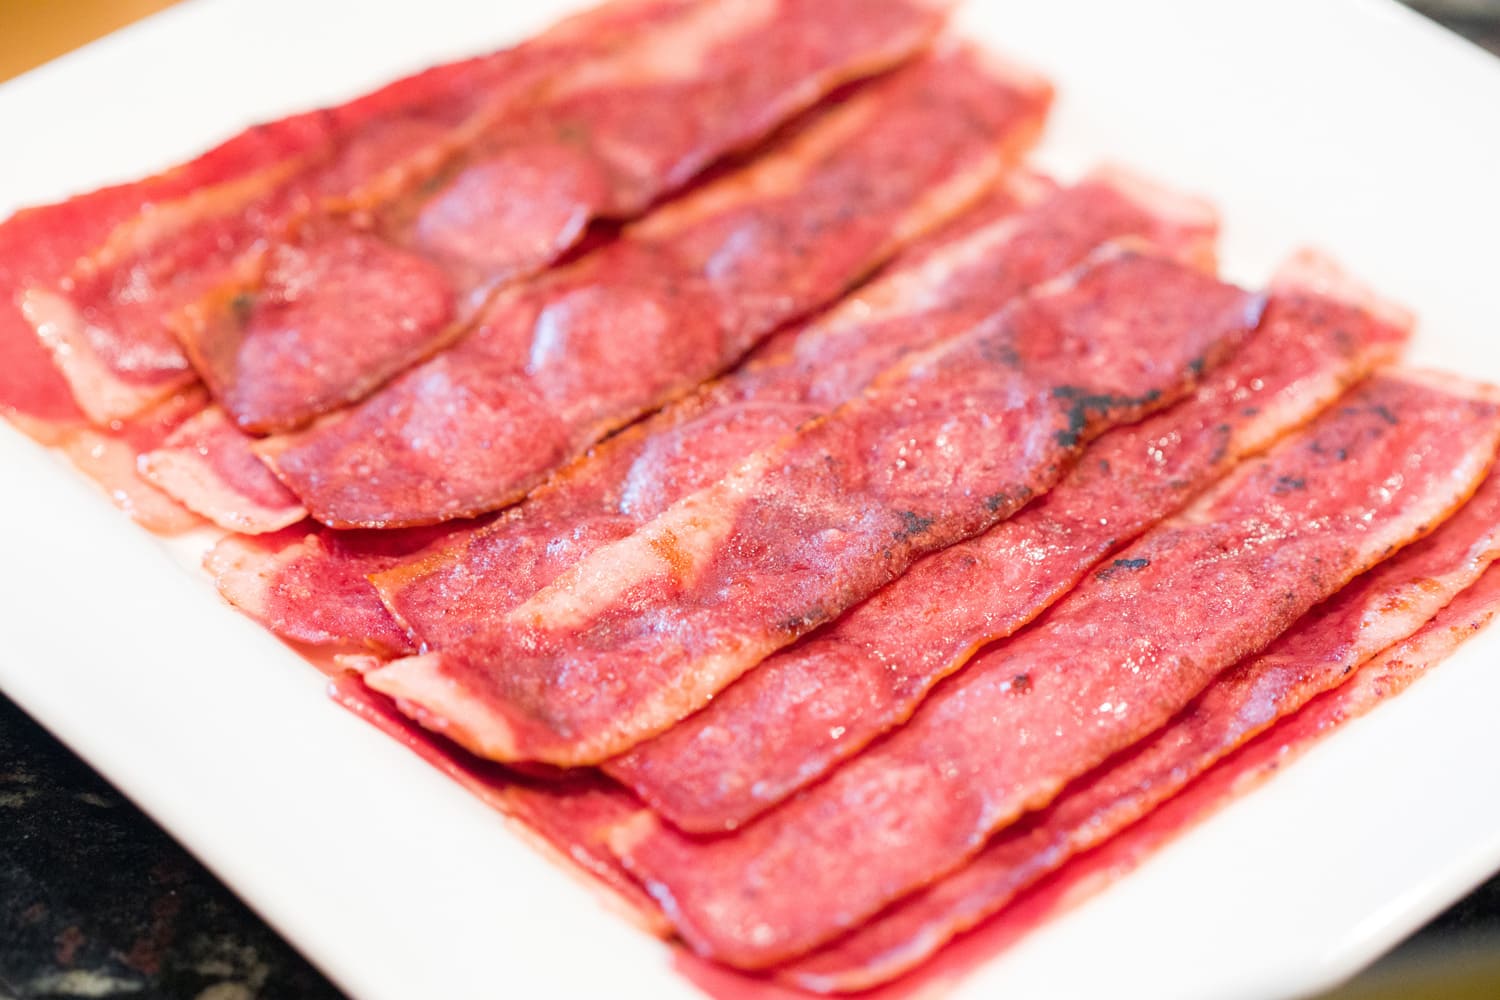 A close up photograph of several sizzling hot turkey bacon slices or pieces on a white serving plate on a kitchen counter ready to eat for breakfast.